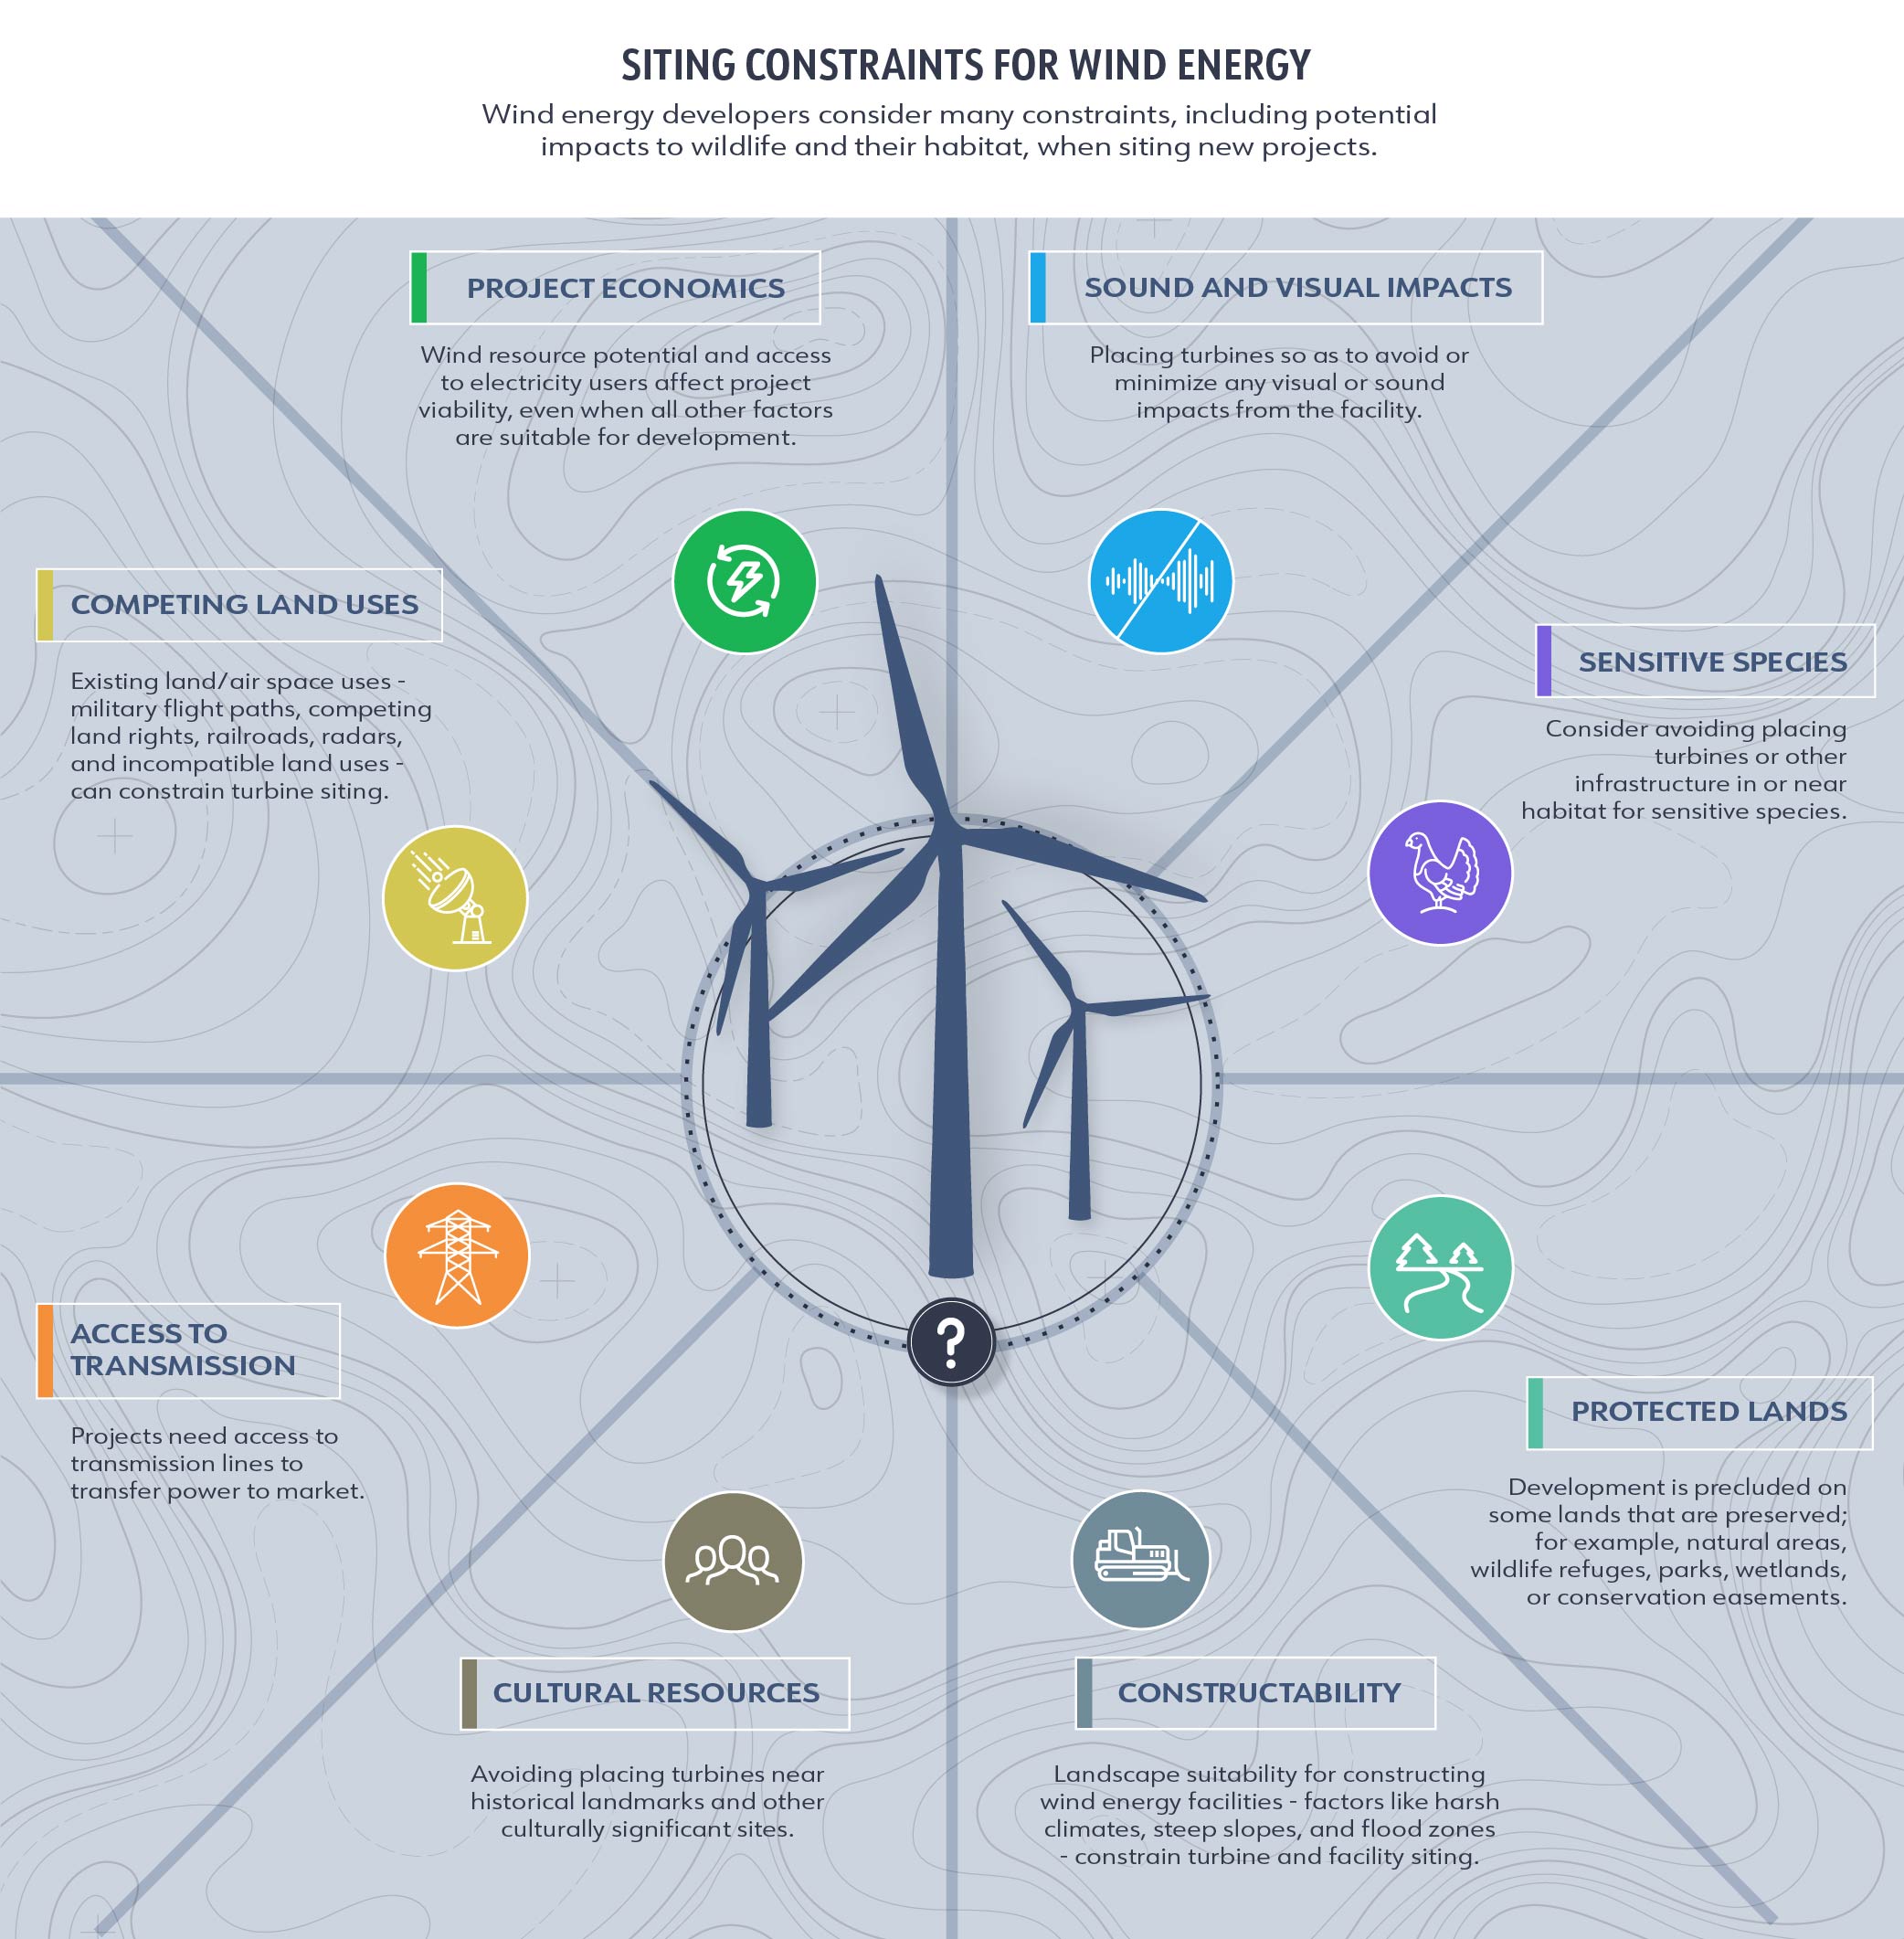 Siting Constraints for Wind Energy - Infographic by AWWI